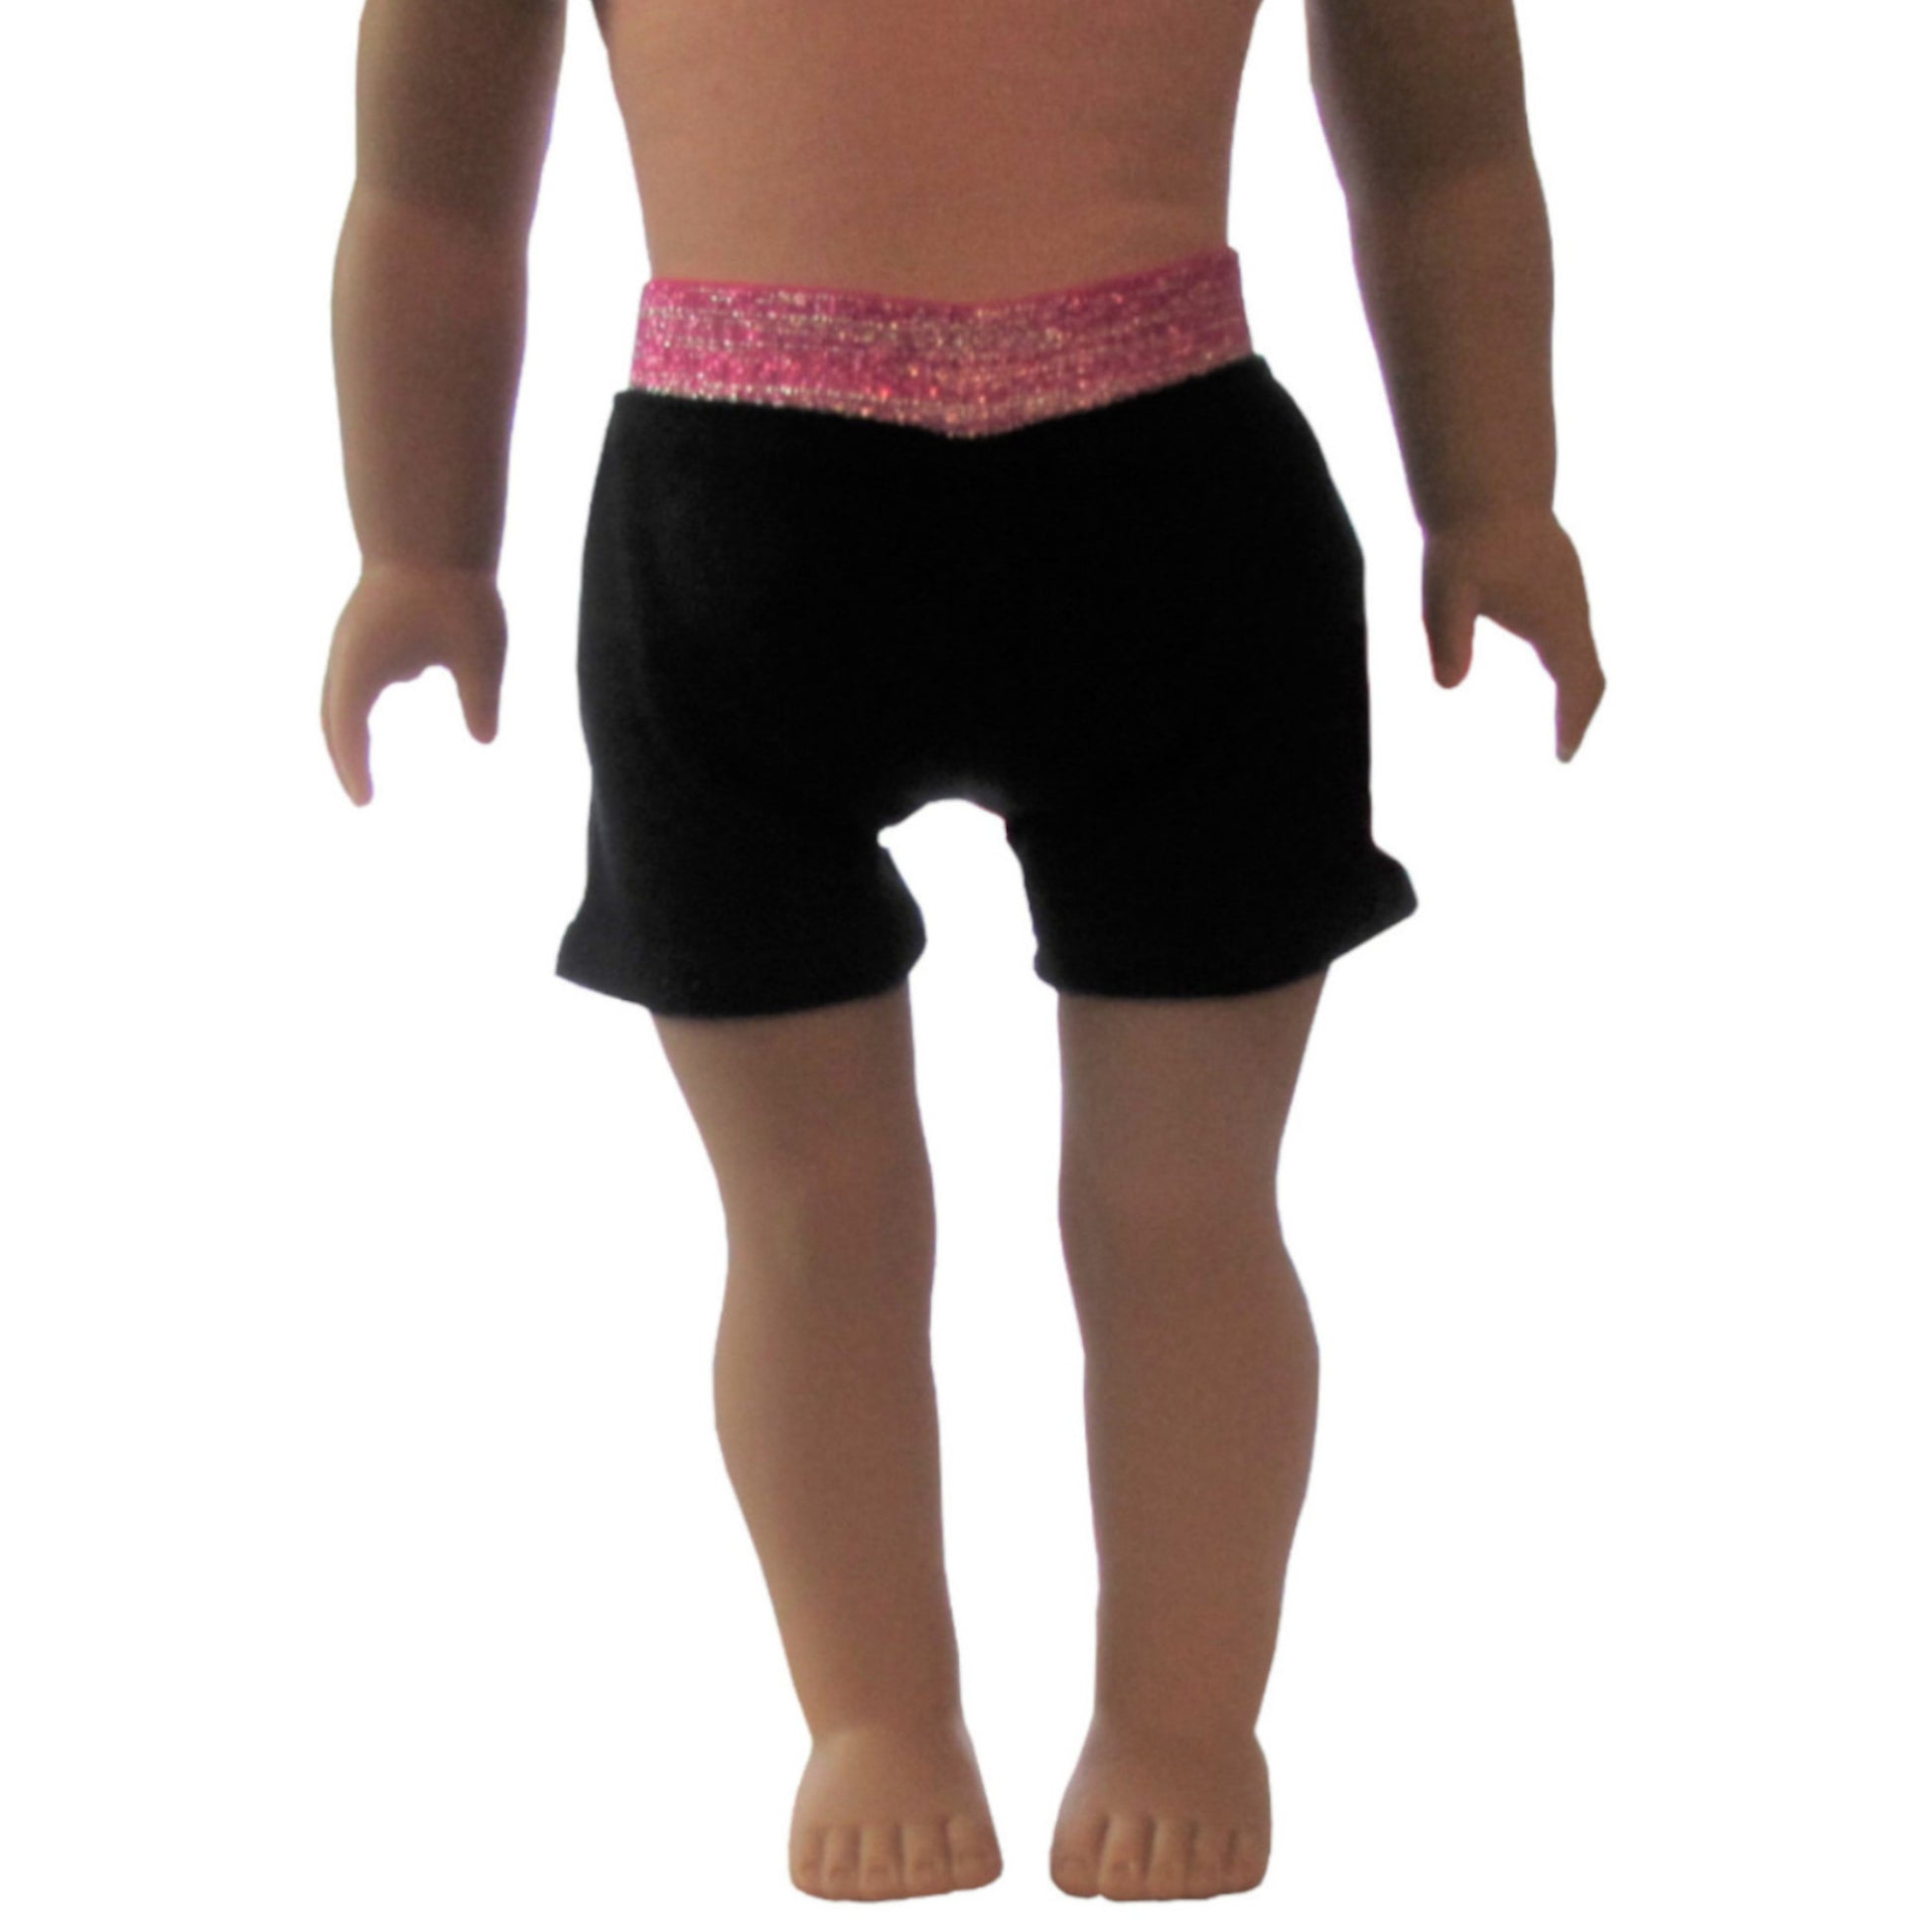 Black Yoga Shorts with Pink Contrast Band for 18-inch dolls 